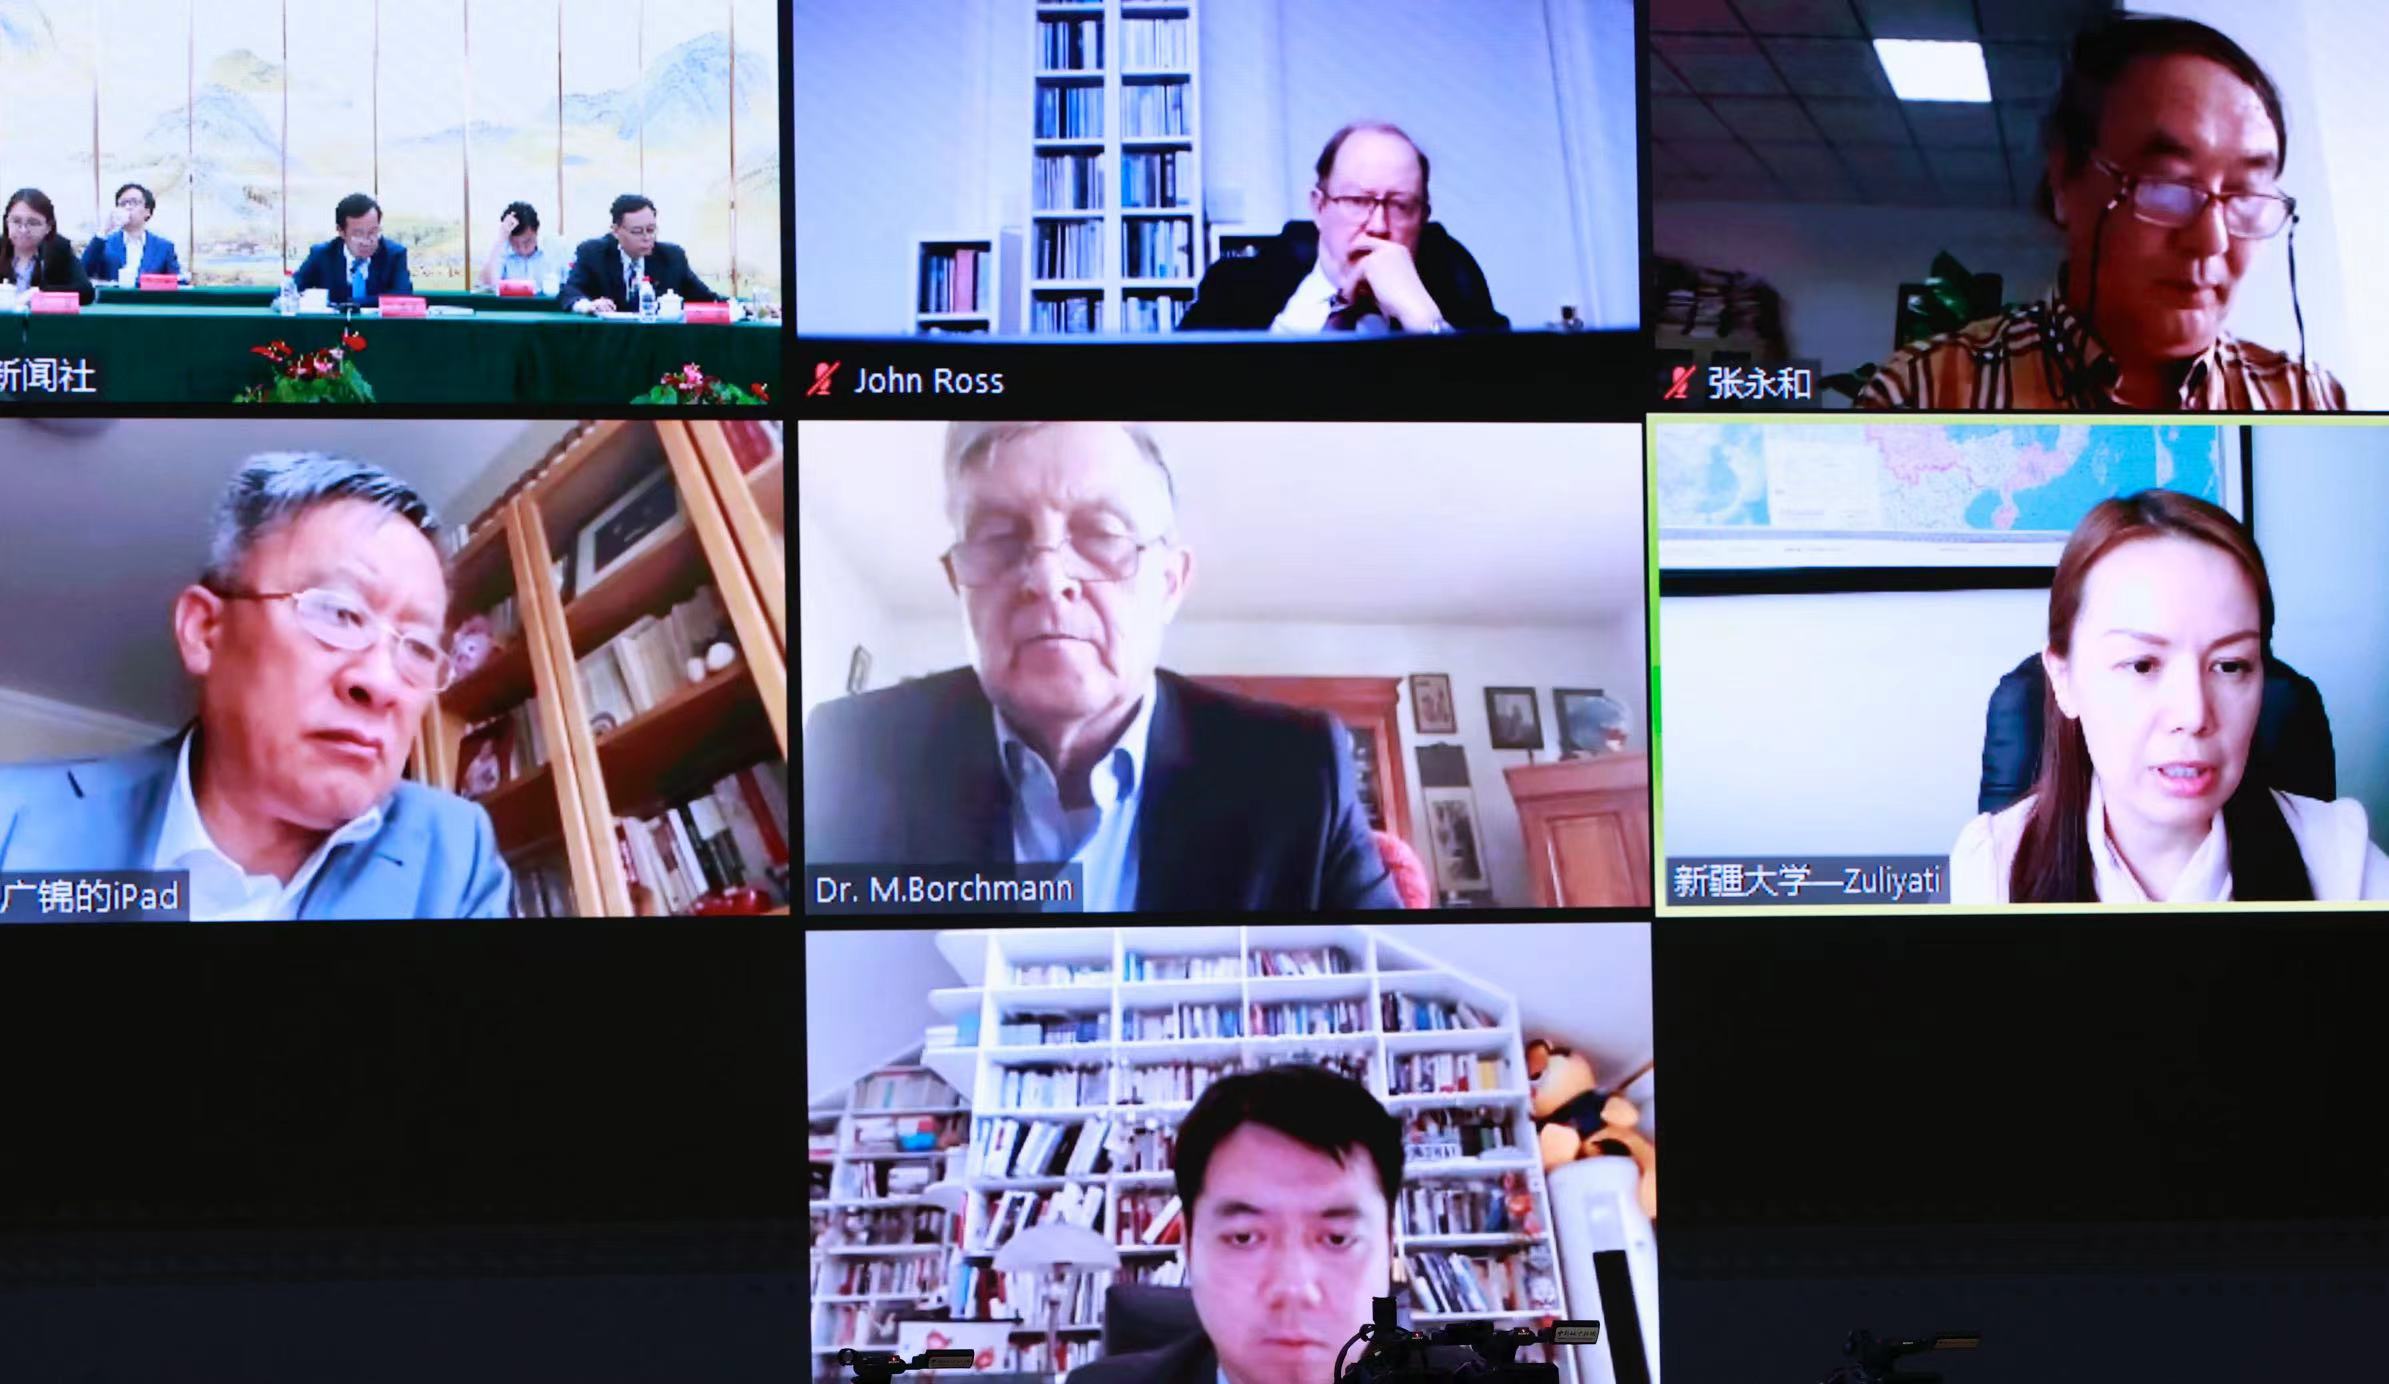 An online seminar on the path of China's Human Rights Development attended by experts and scholars from China, the UK, Germany, Switzerland and other countries. Source: China News Service